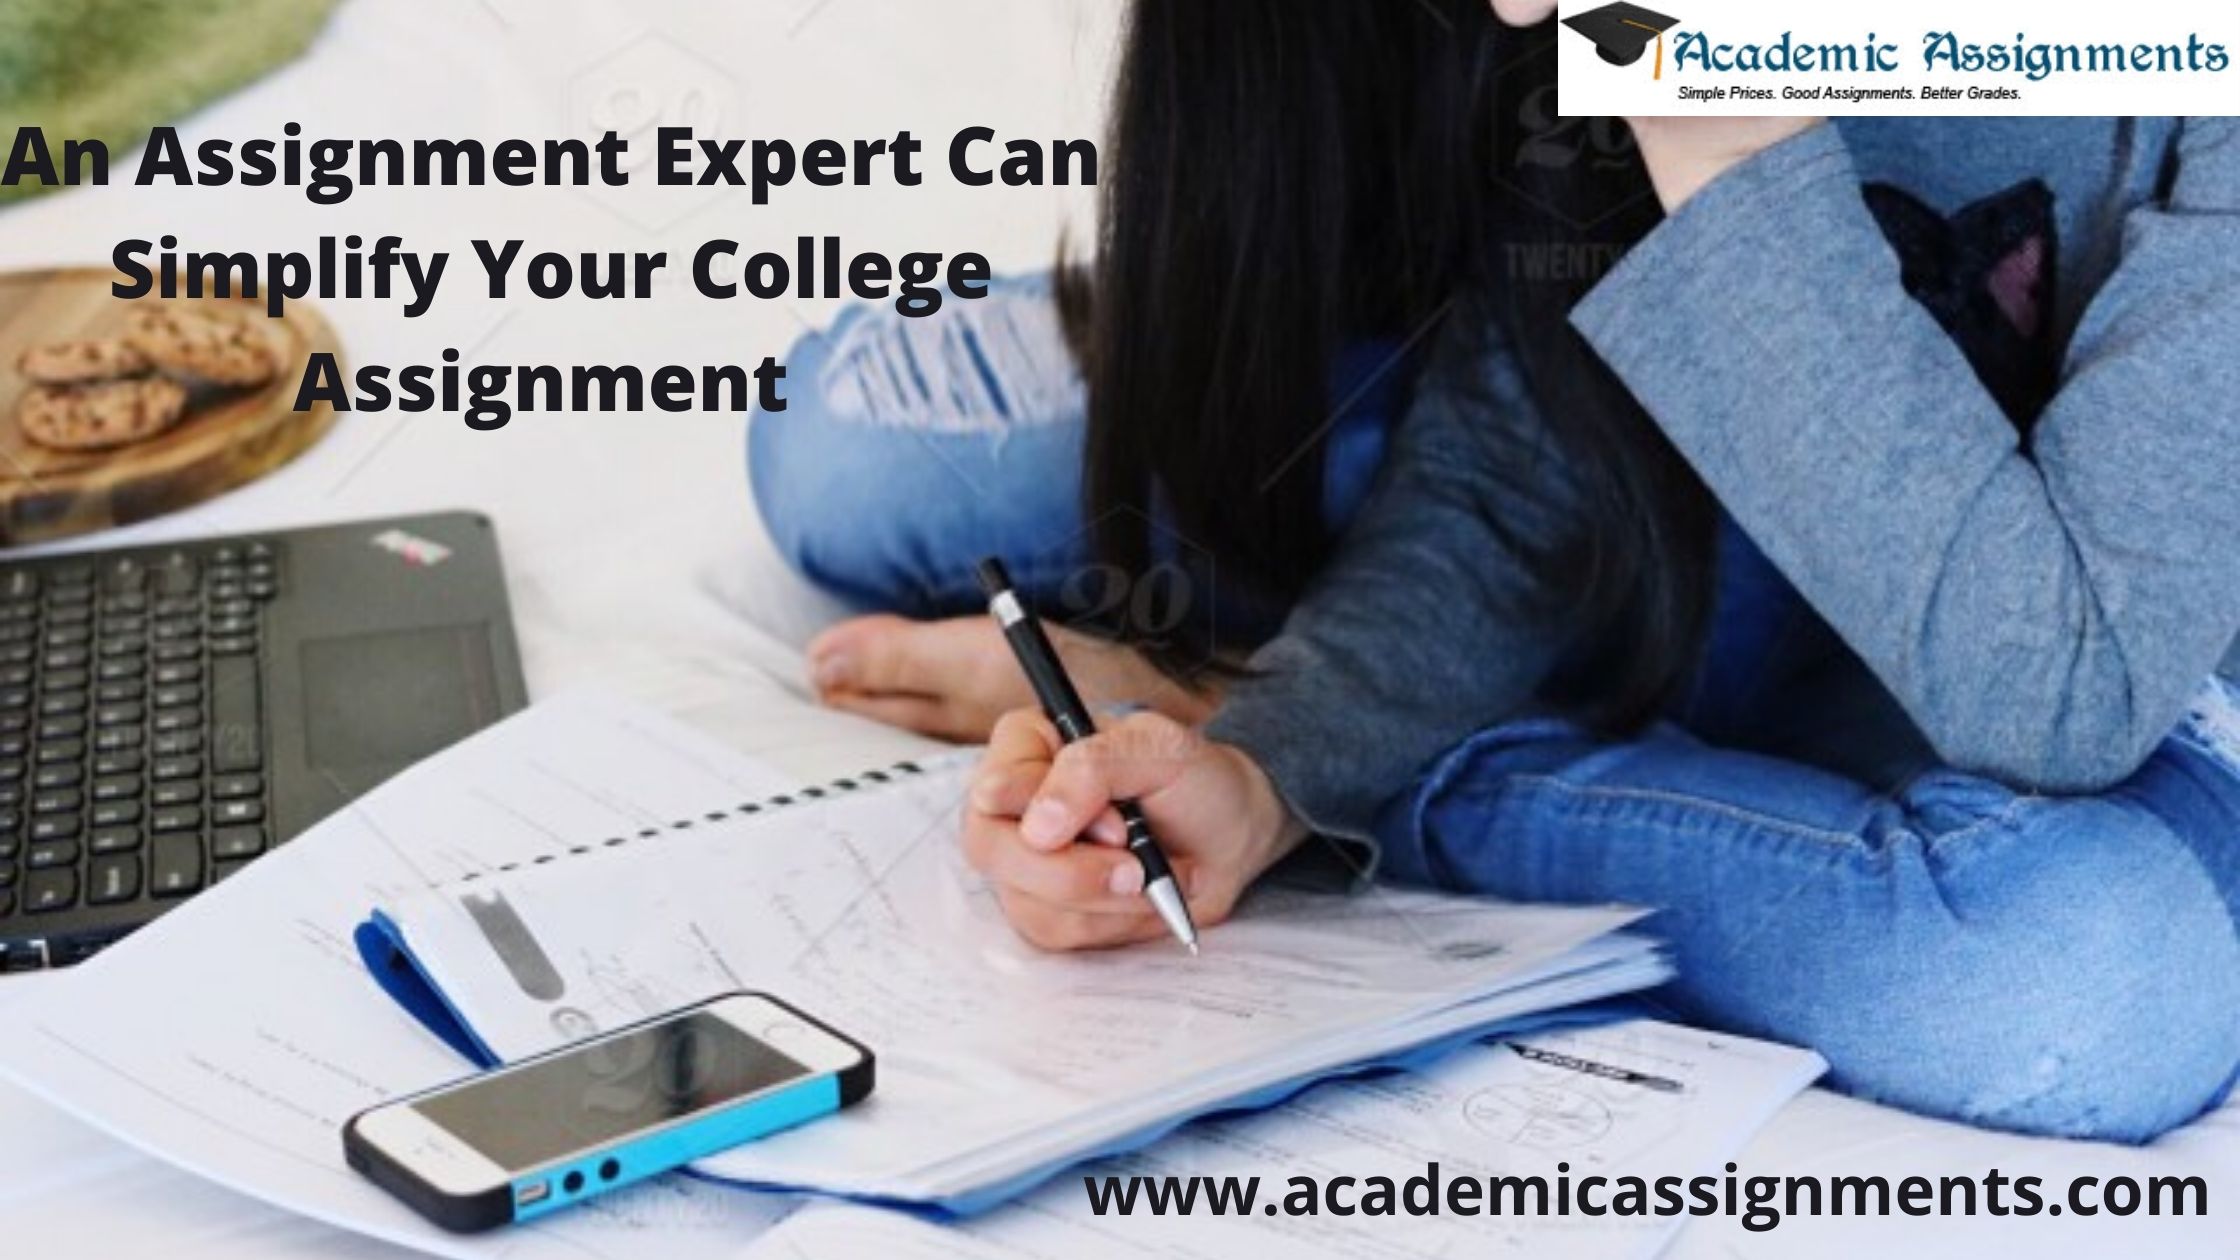 An Assignment Expert Can Simplify Your College Assignment